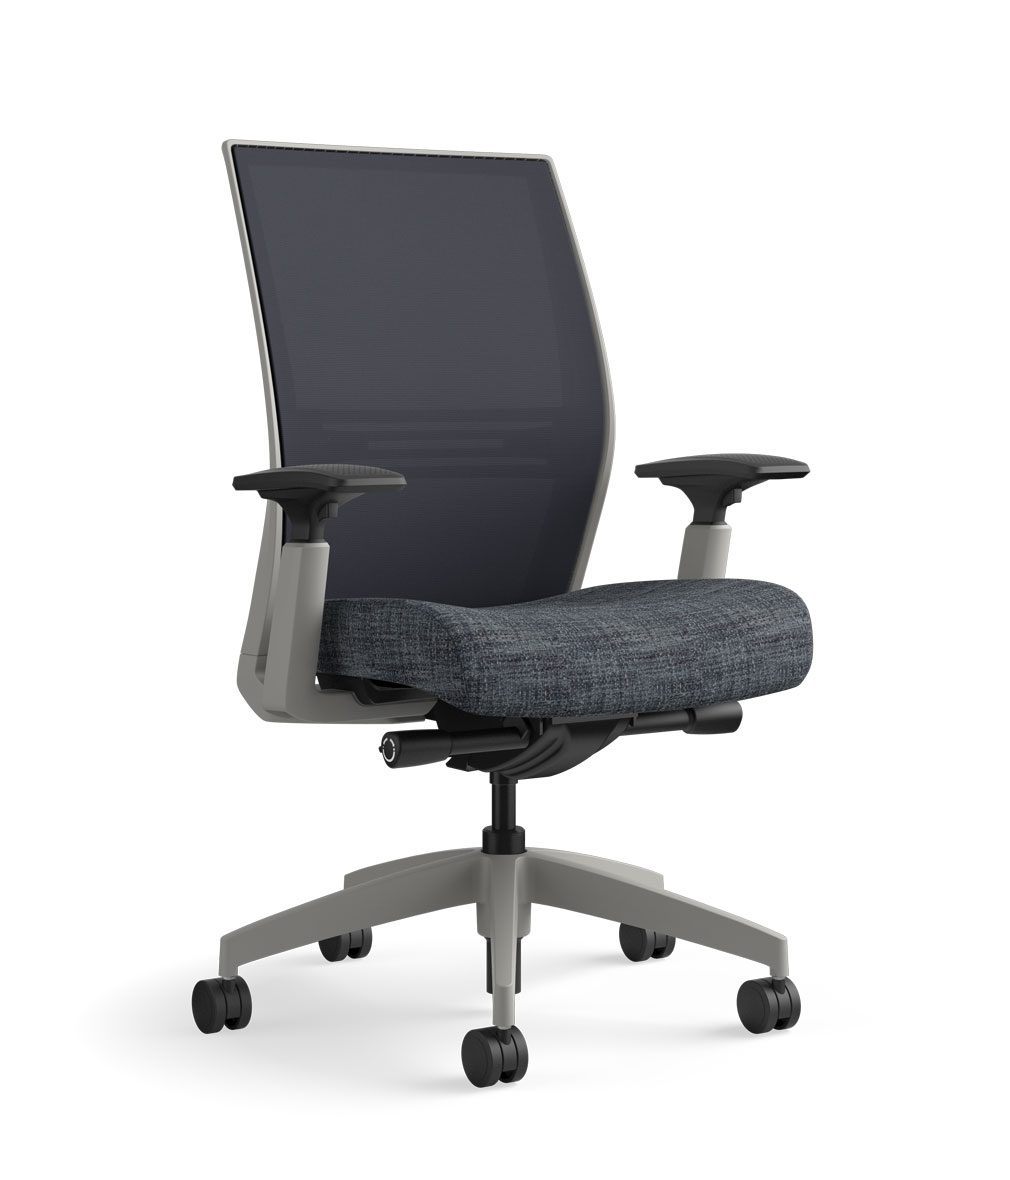 SitOnIt Amplify Mesh Back Task Chair